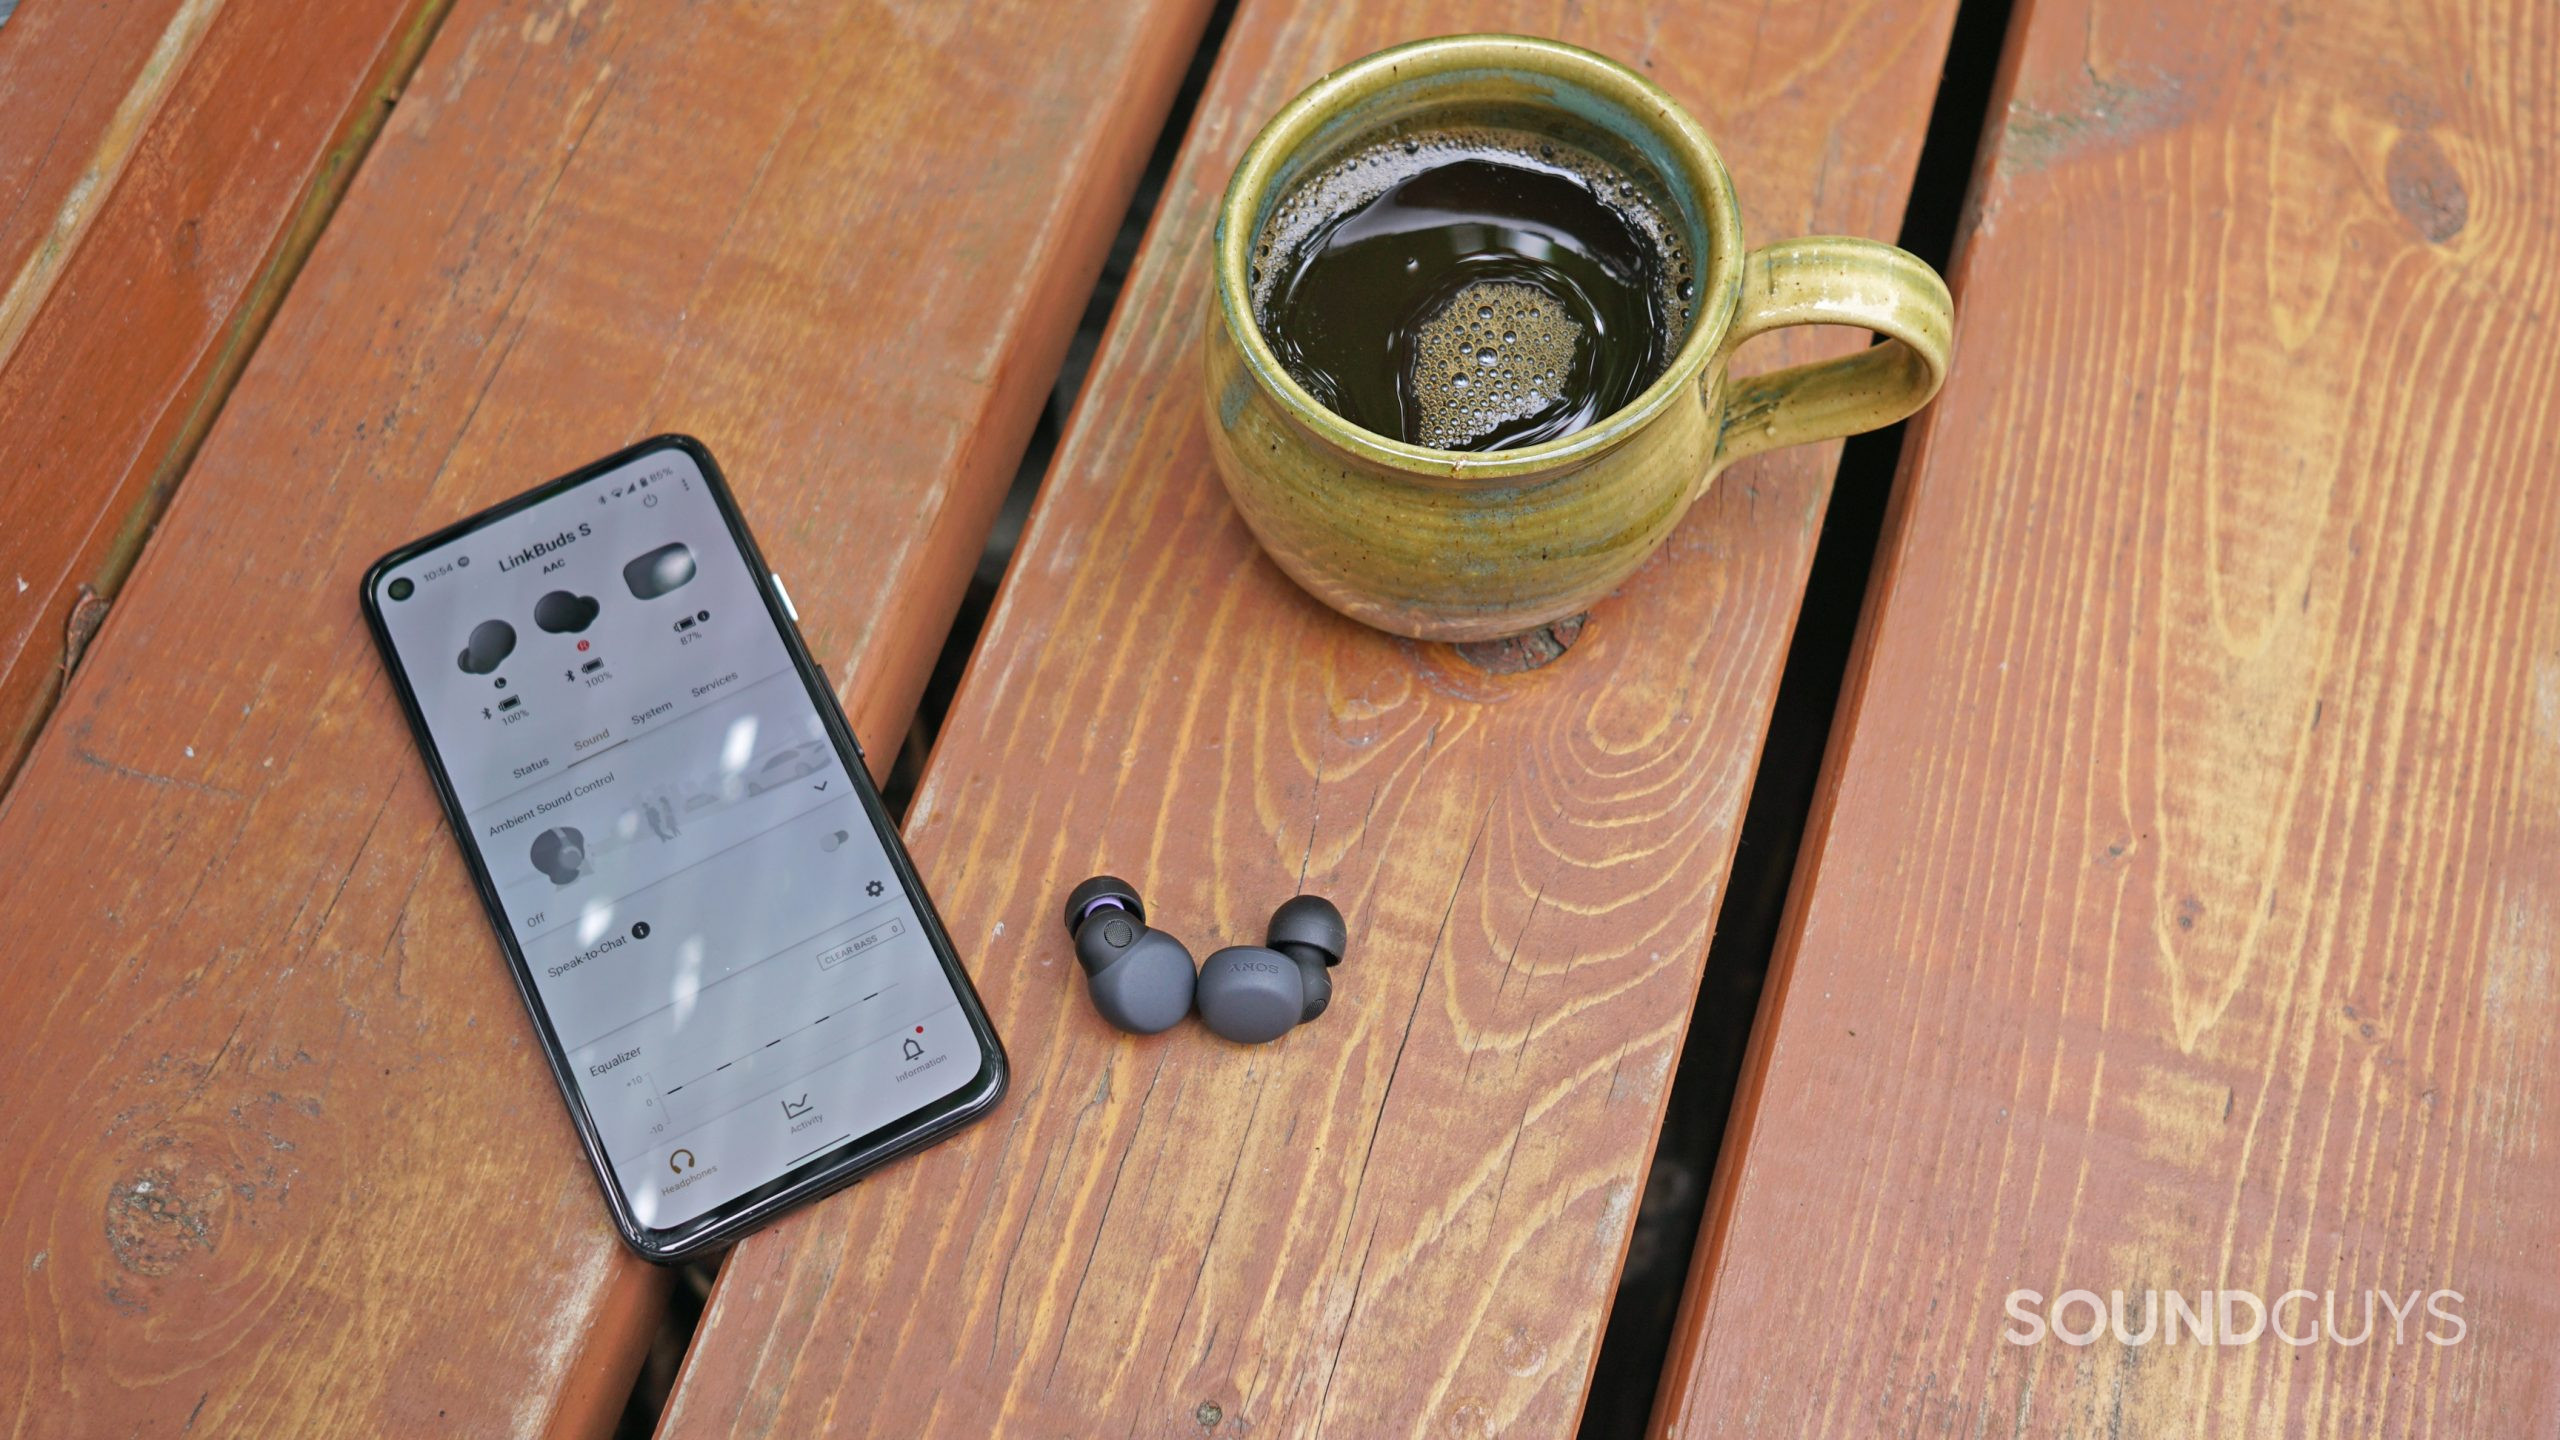 The Sony LinkBuds S true wireless earbuds lay on a wooden surface next to a google Pixel 4a running the Sony Headphones Connect app and a cup of coffee.